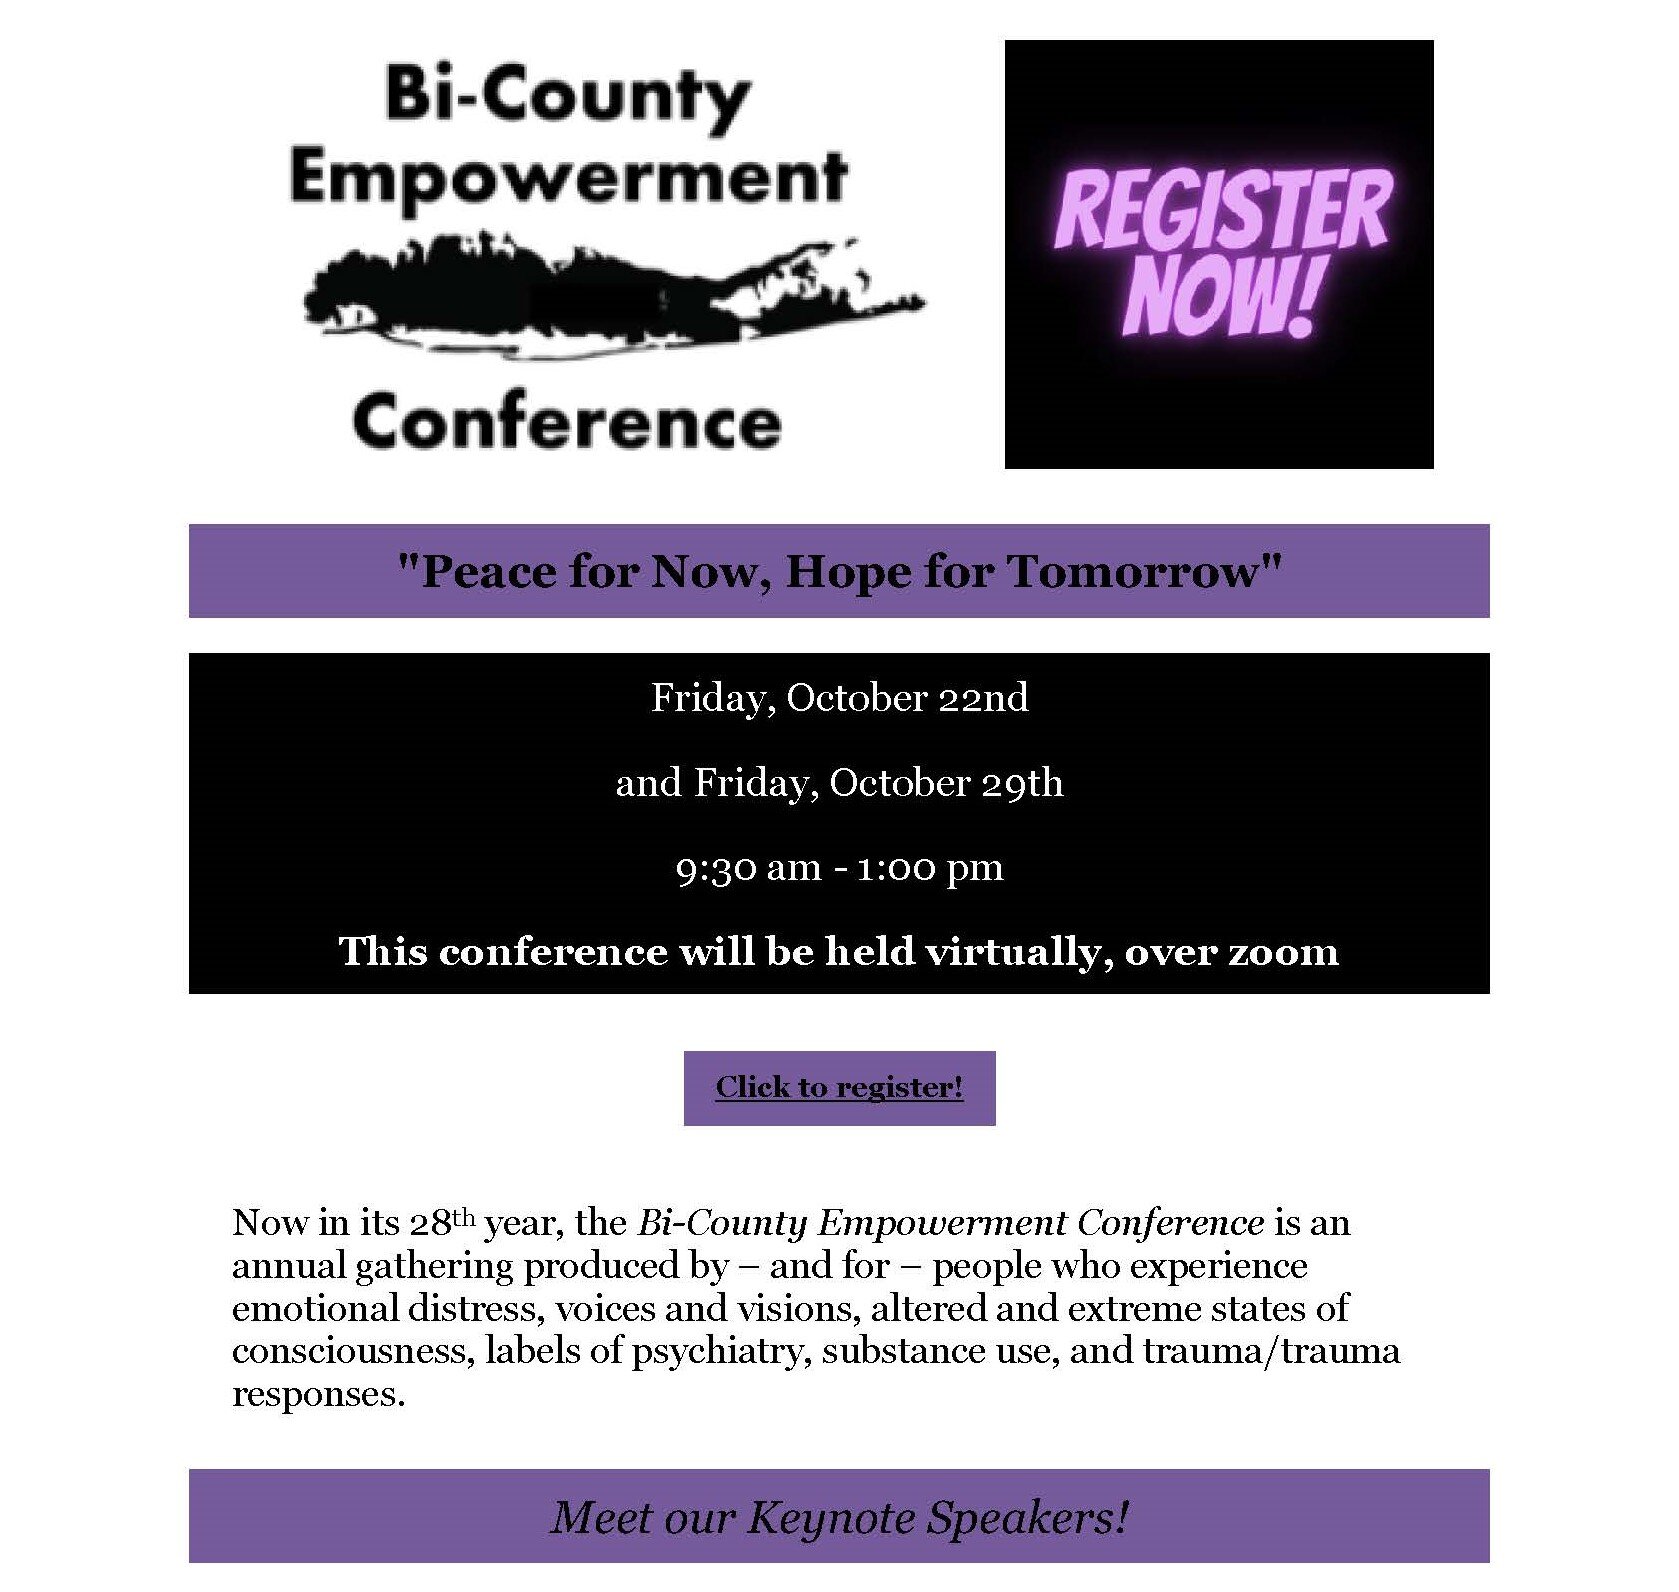 Bi-County Empowerment Conference 2021_Page_1.jpg